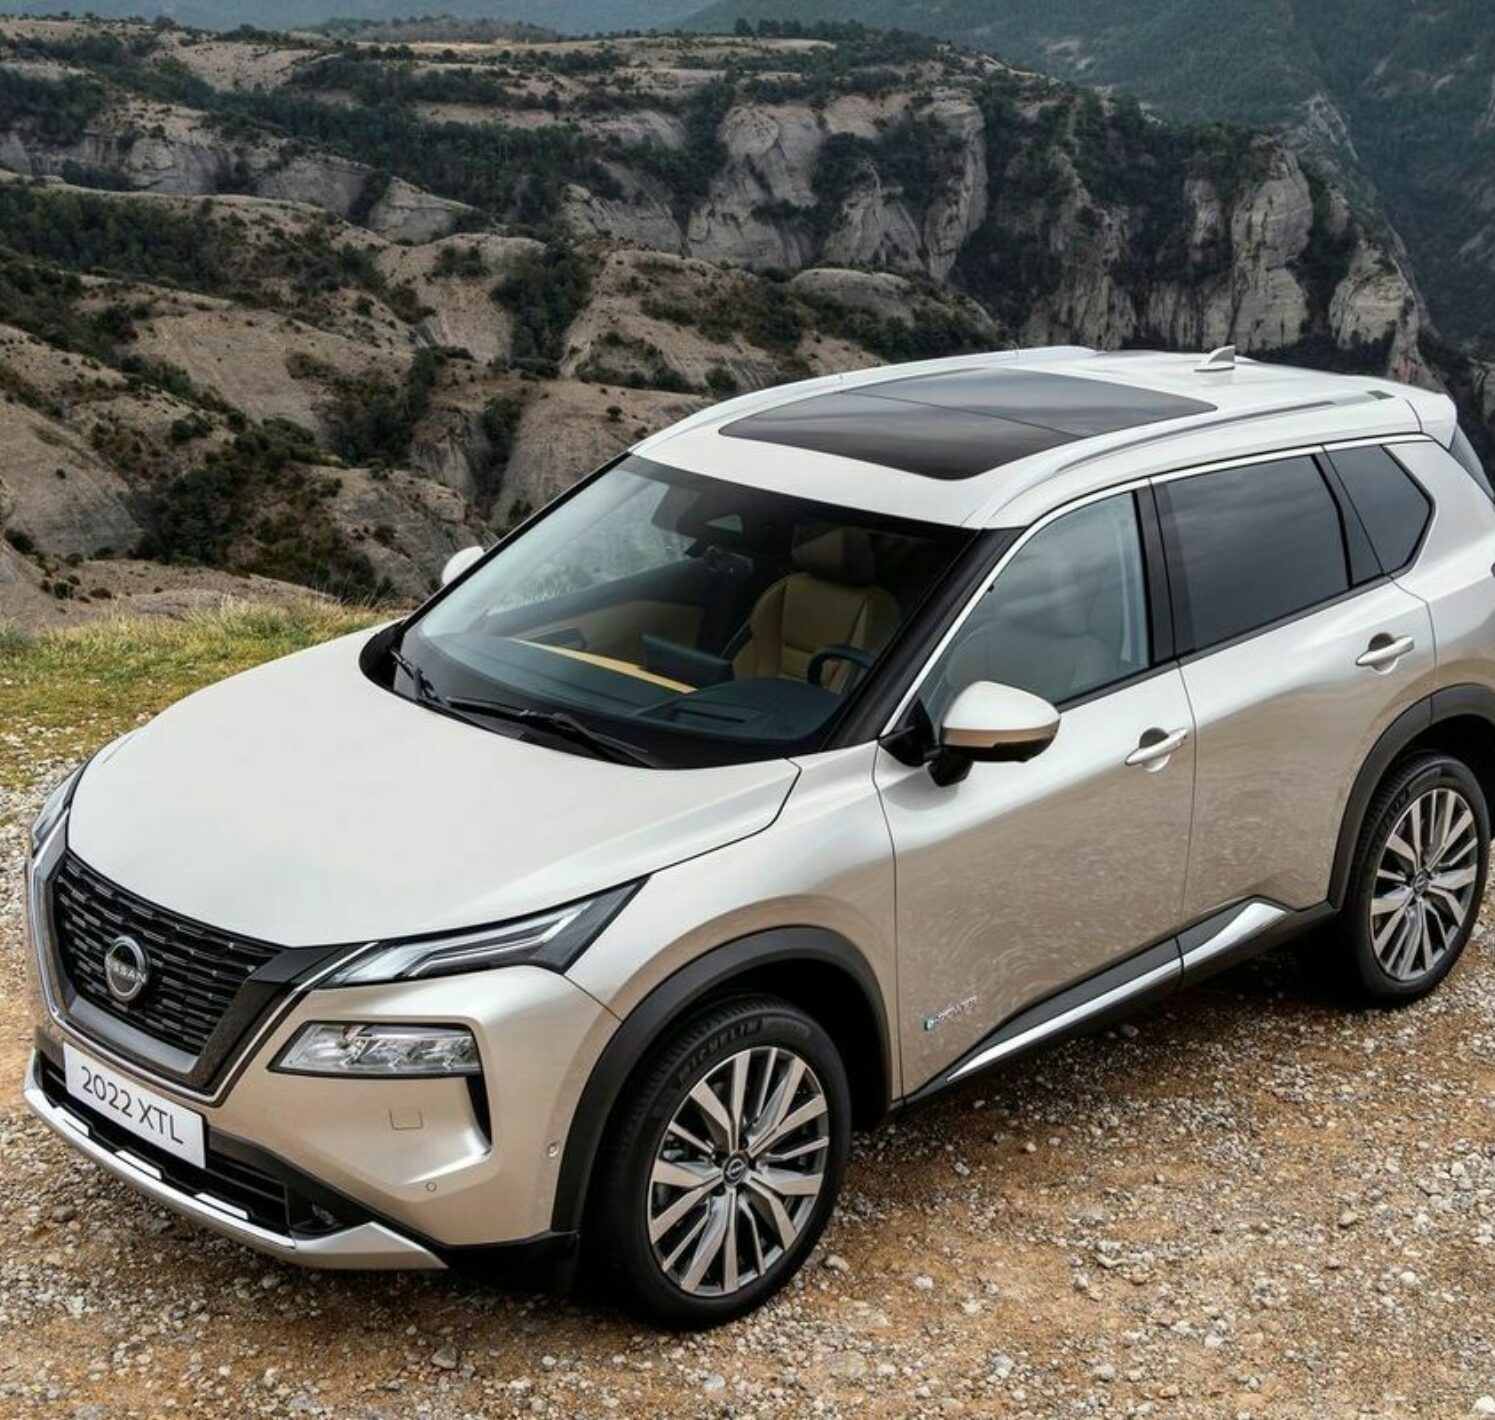 https://autofilter.sk/assets/images/x-trail/gallery/nissan-x-trail-2022_37-galeria.jpg - obrazok